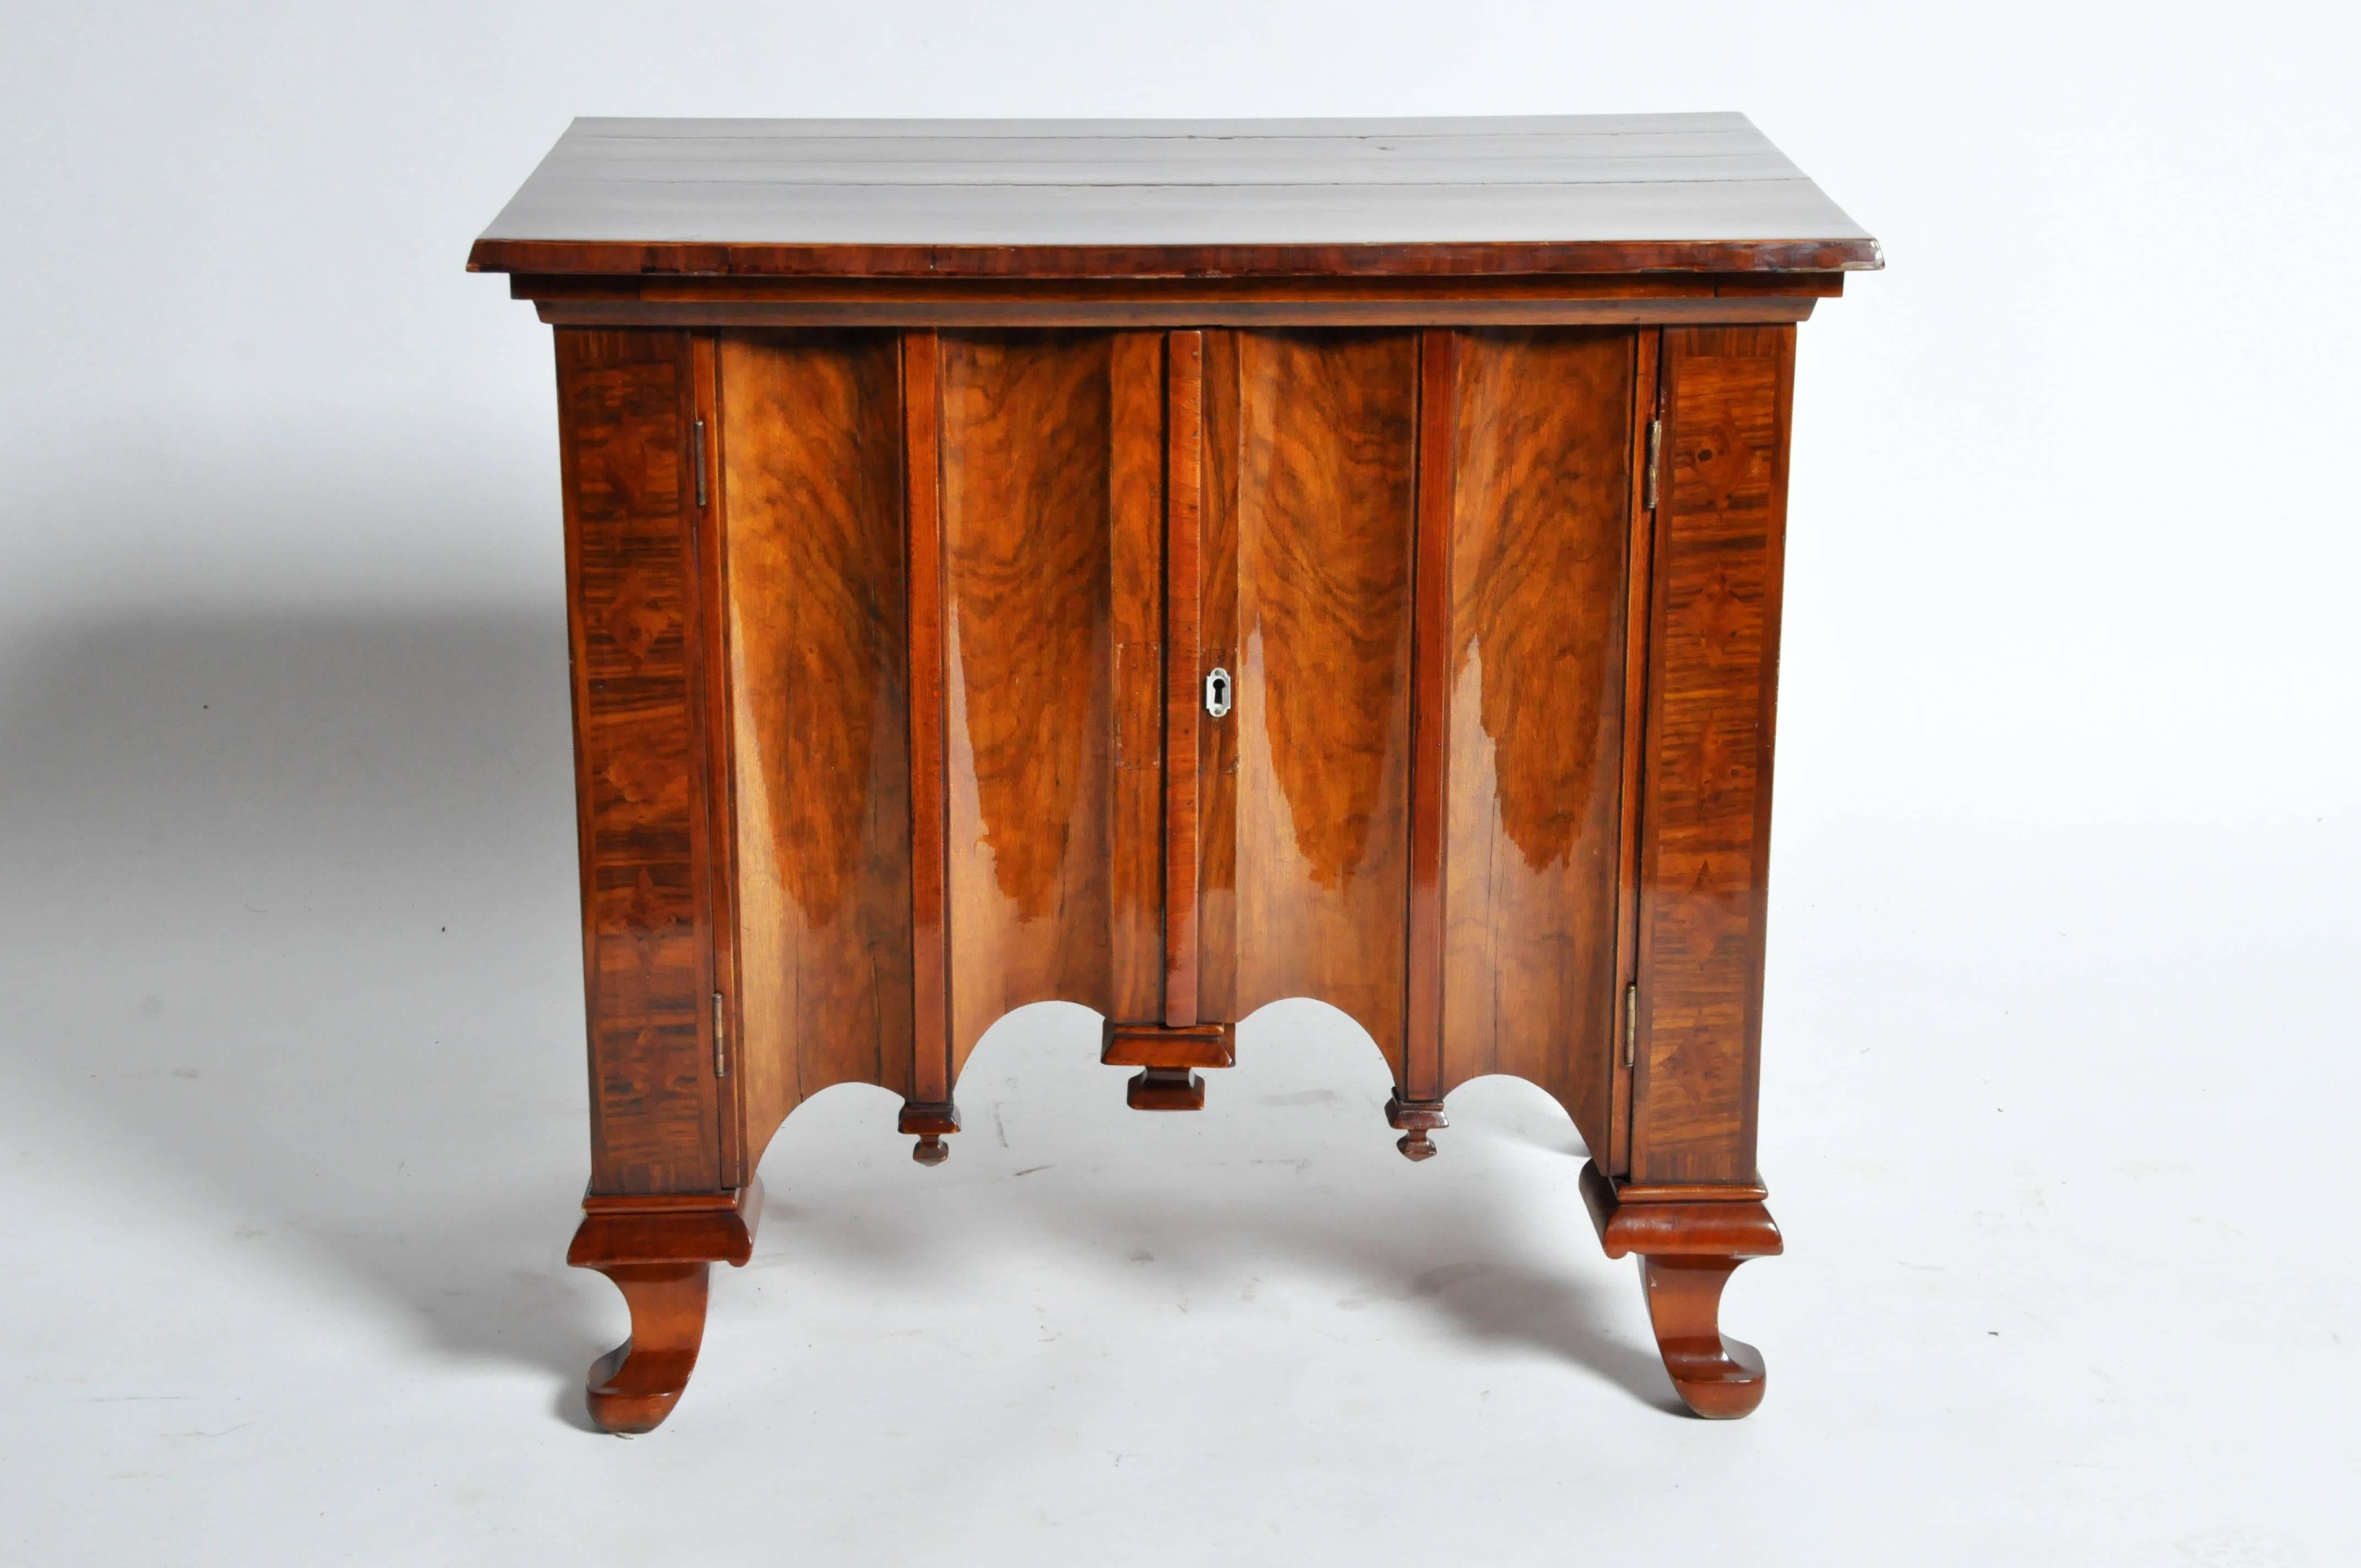 This neo-Gothic Hungarian side chest was designed by Lajos Kozma circa 1930s. It is made from walnut veneers and has a deeply scalloped profile. As is typical of Kozmas' work, this piece blends traditional and modern motifs.